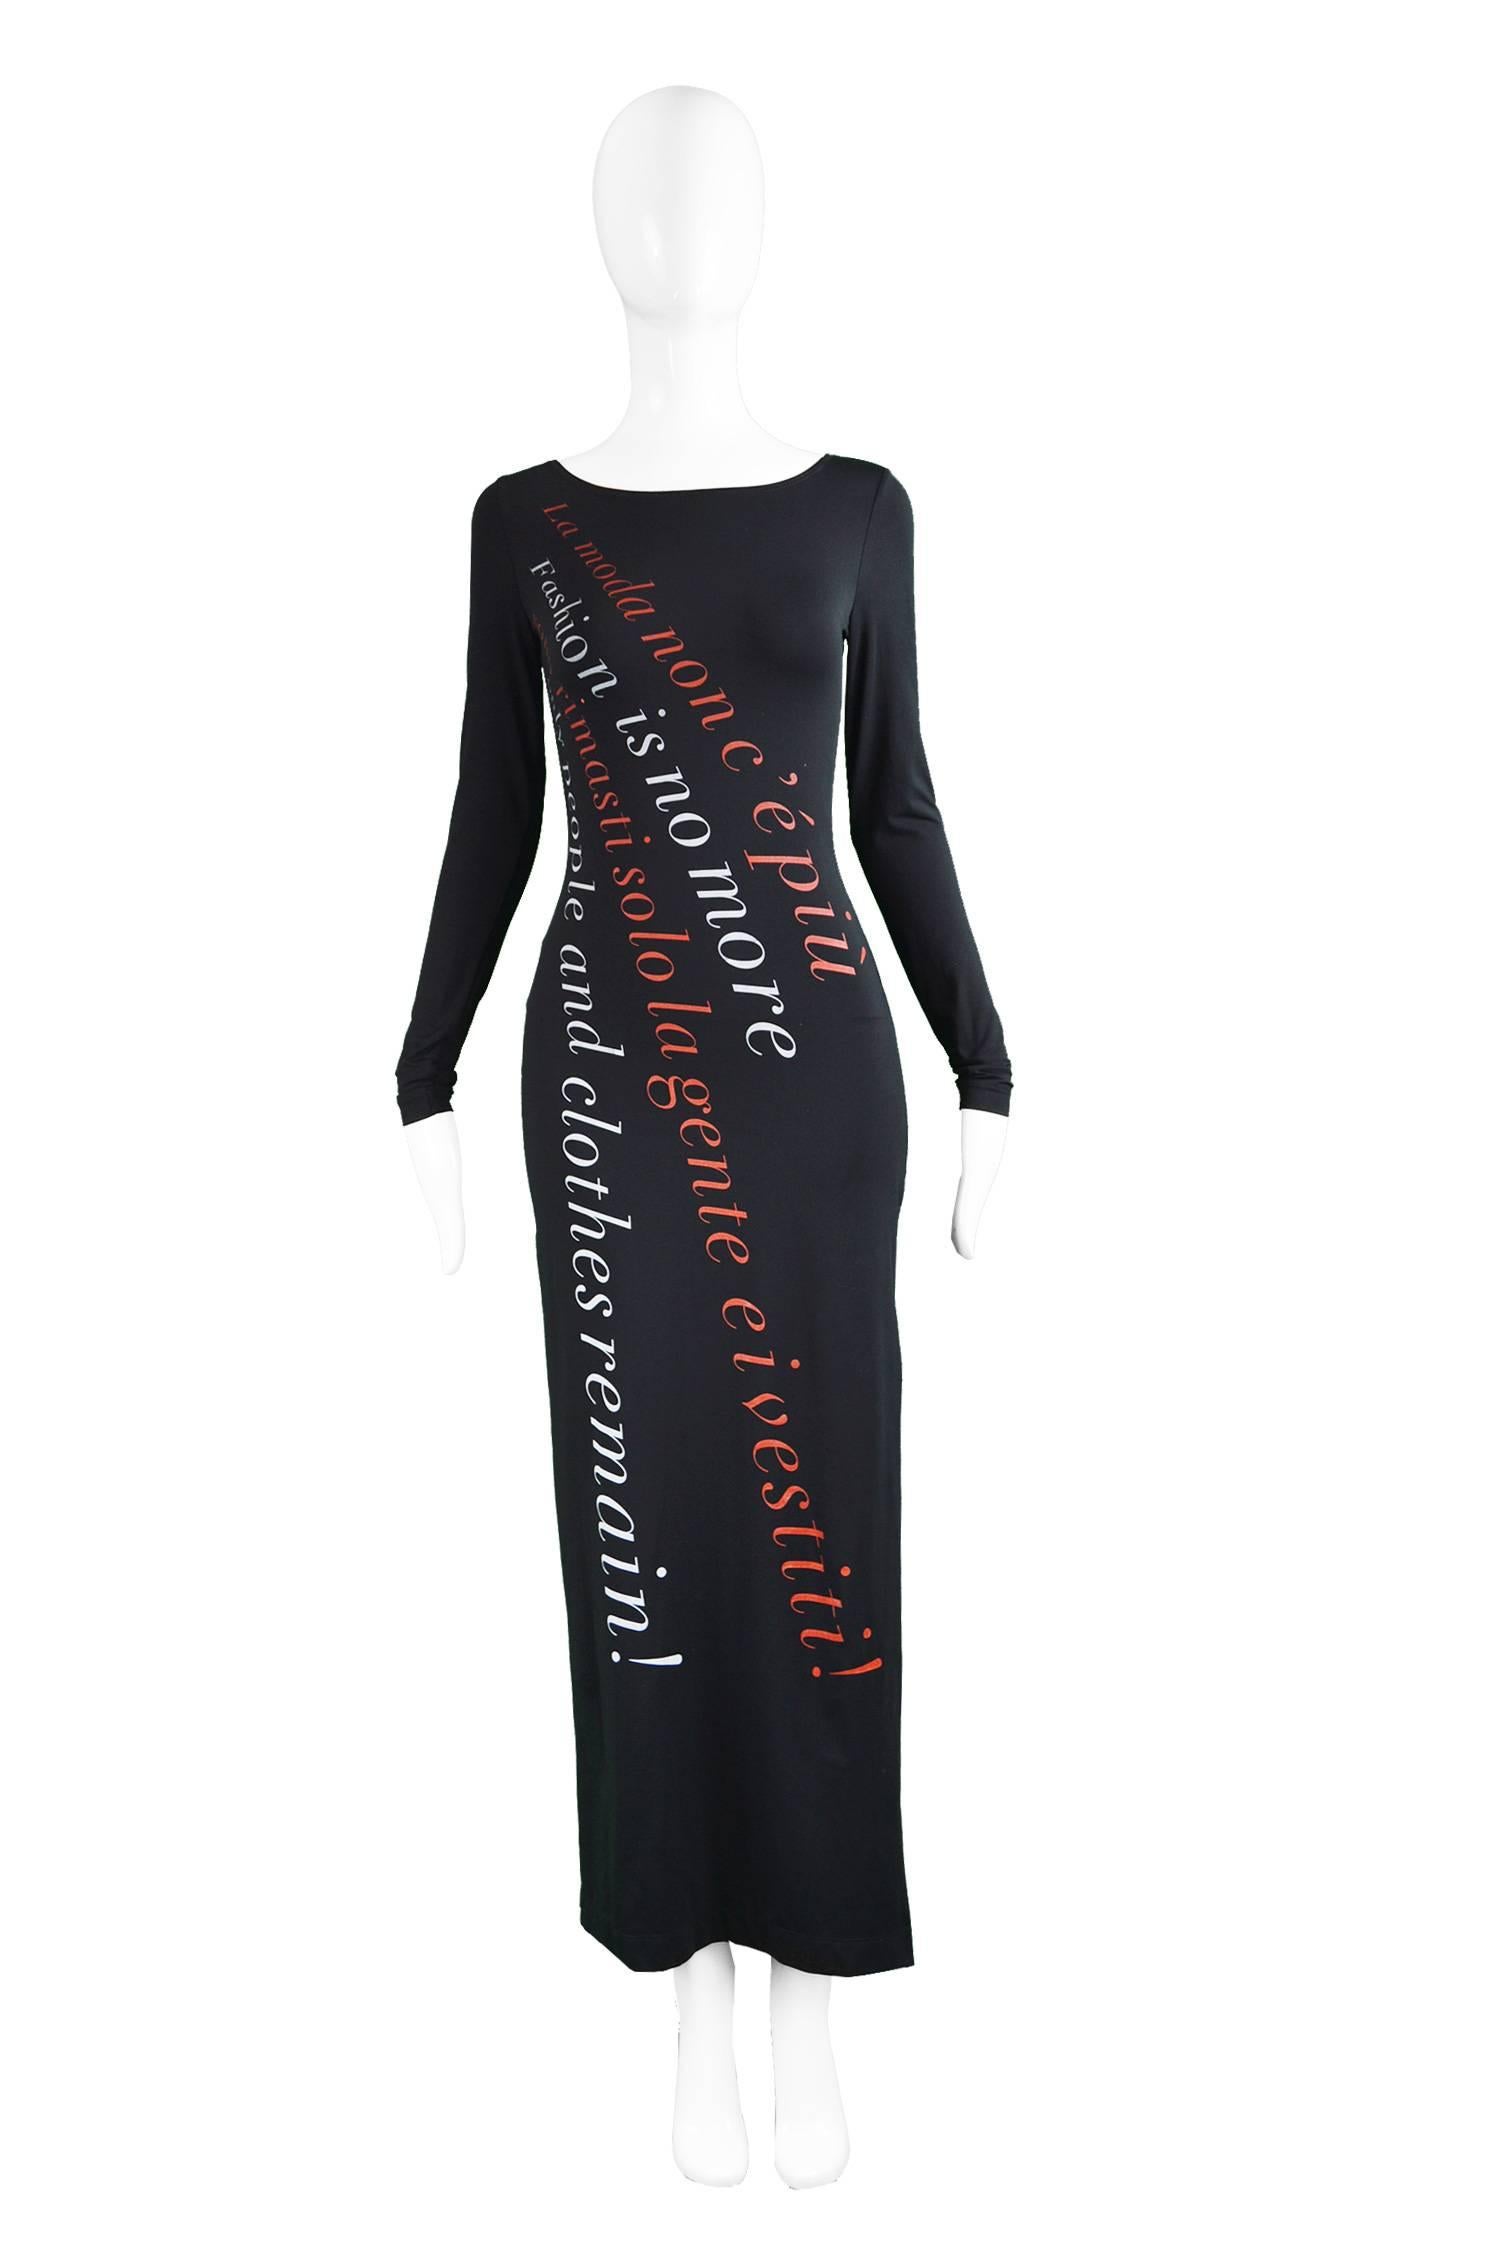 Moschino "Fashion is No More" Slinky Black Jersey Maxi Dress, 1990s

Estimated Size: UK 8-10/ US 4-6/ EU 36-38. Please check measurements.
Bust - Stretches from 32-34” / 81-86cm
Waist - 26” / 66cm
Hips - 34” / 86cm
Length (Shoulder to Hem)